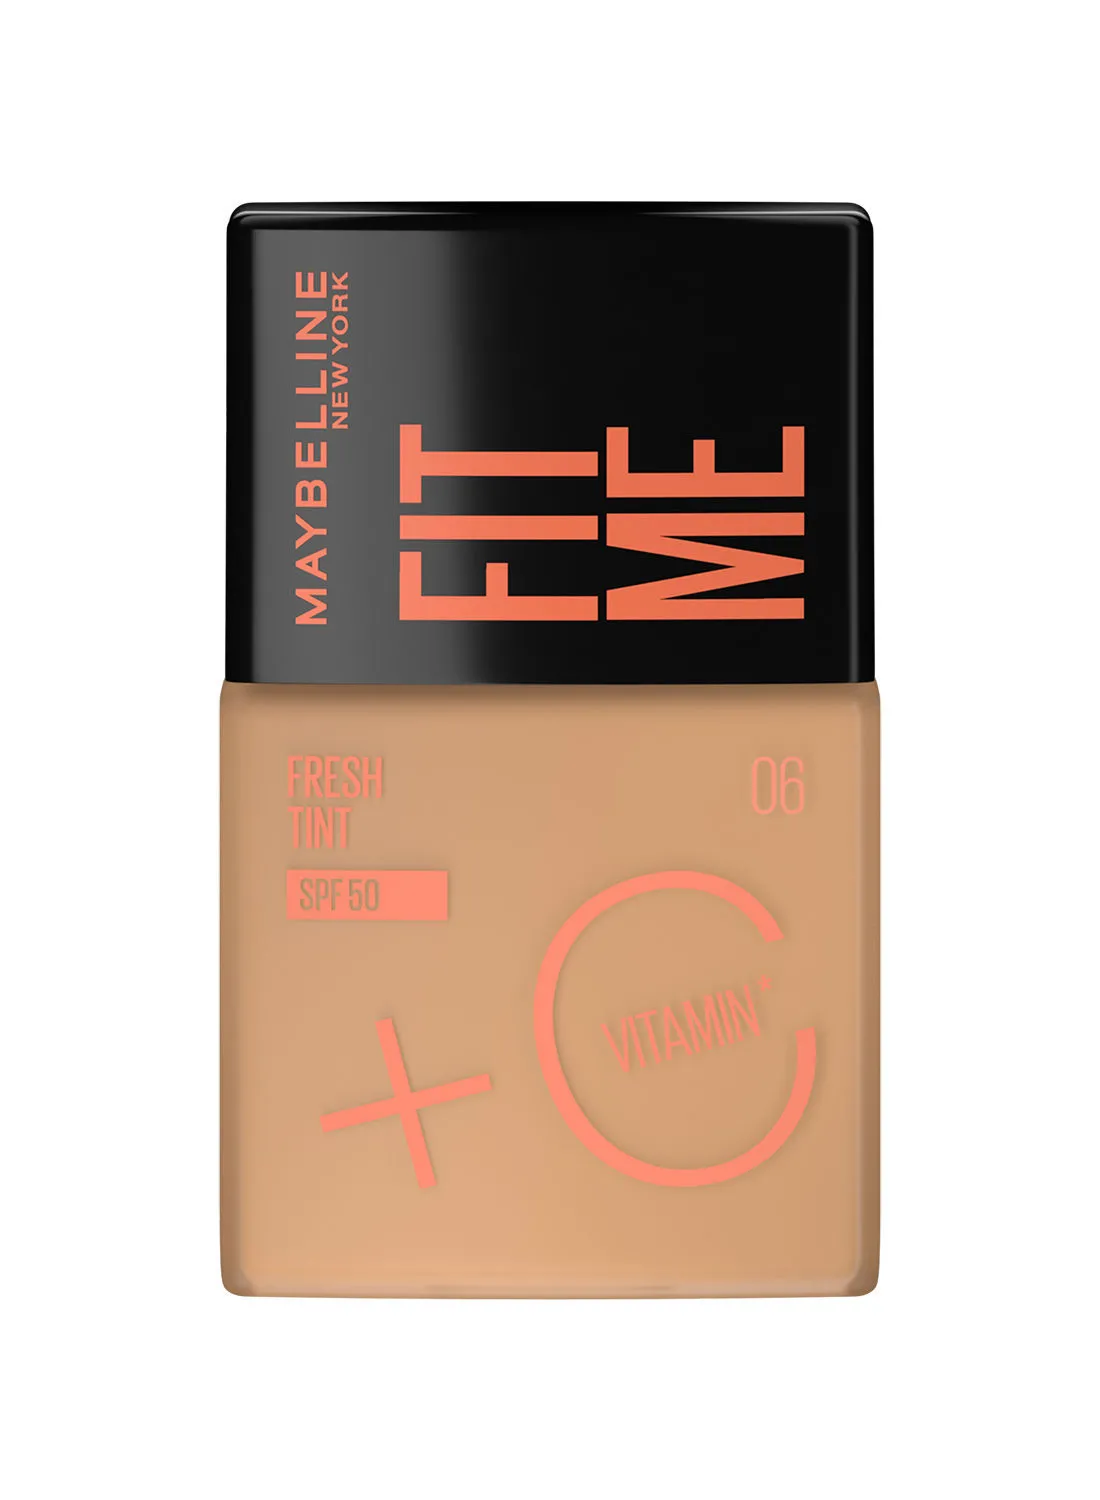 MAYBELLINE NEW YORK Maybelline New York, Fit Me Fresh Tint SPF 50 with Brightening Vitamin C, 06